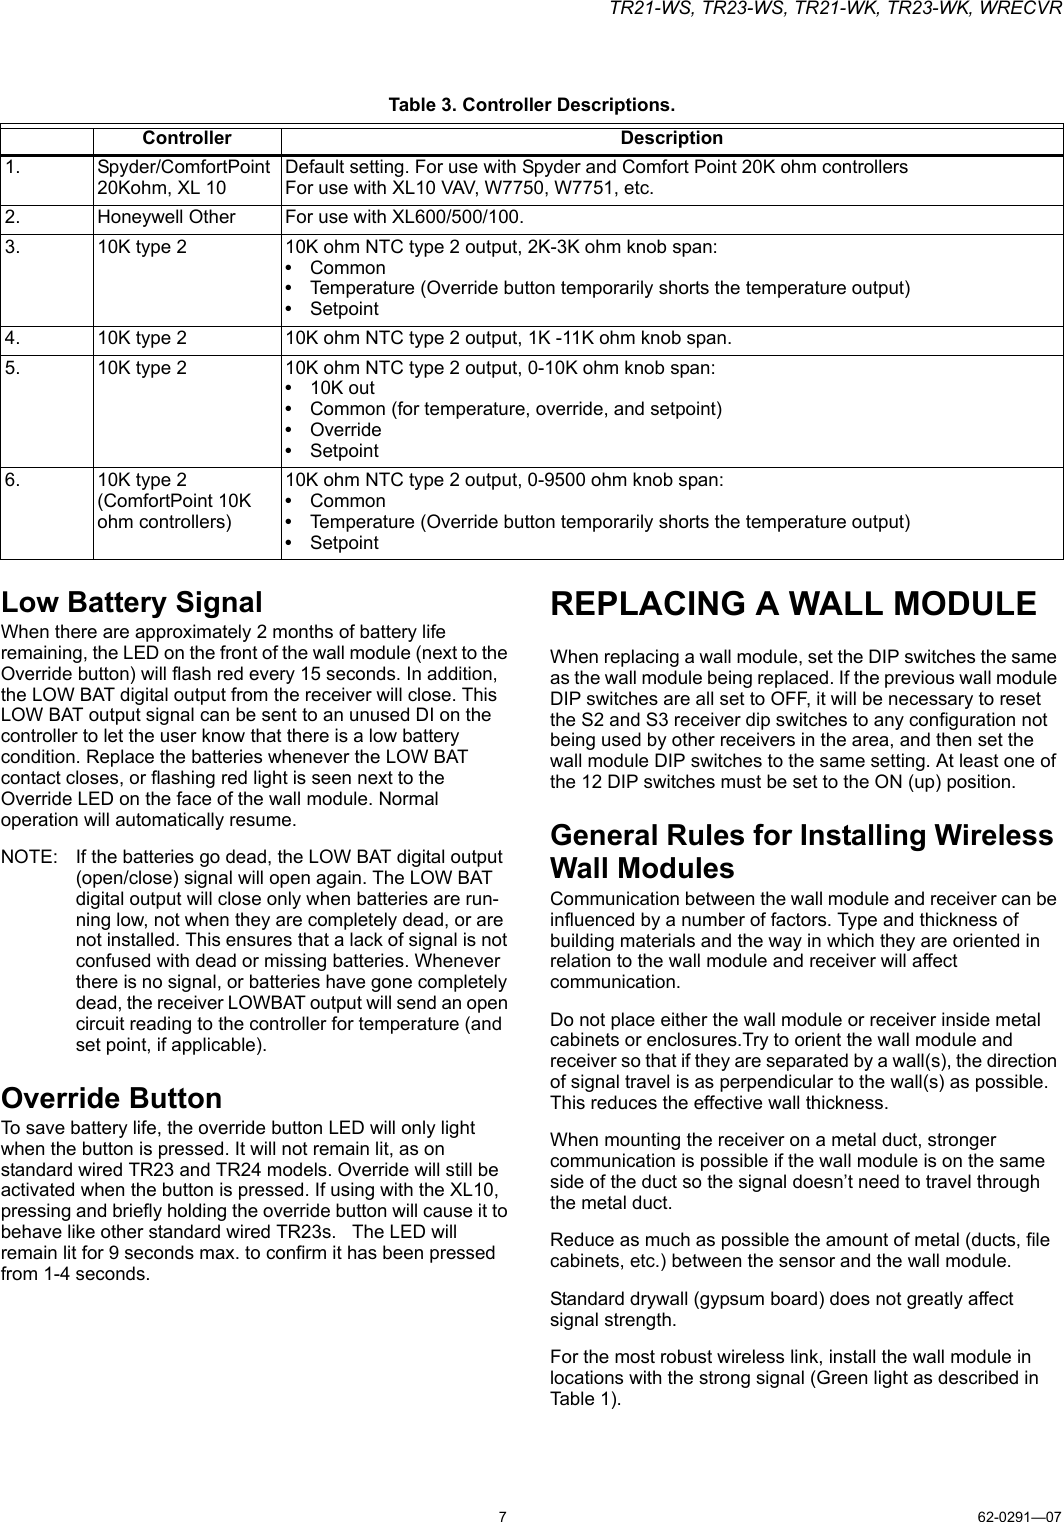 TR21-WS, TR23-WS, TR21-WK, TR23-WK, WRECVR762-0291—07Low Battery SignalWhen there are approximately 2 months of battery life remaining, the LED on the front of the wall module (next to the Override button) will flash red every 15 seconds. In addition, the LOW BAT digital output from the receiver will close. This LOW BAT output signal can be sent to an unused DI on the controller to let the user know that there is a low battery condition. Replace the batteries whenever the LOW BAT contact closes, or flashing red light is seen next to the Override LED on the face of the wall module. Normal operation will automatically resume.NOTE: If the batteries go dead, the LOW BAT digital output (open/close) signal will open again. The LOW BAT digital output will close only when batteries are run-ning low, not when they are completely dead, or are not installed. This ensures that a lack of signal is not confused with dead or missing batteries. Whenever there is no signal, or batteries have gone completely dead, the receiver LOWBAT output will send an open circuit reading to the controller for temperature (and set point, if applicable).Override ButtonTo save battery life, the override button LED will only light when the button is pressed. It will not remain lit, as on standard wired TR23 and TR24 models. Override will still be activated when the button is pressed. If using with the XL10, pressing and briefly holding the override button will cause it to behave like other standard wired TR23s.   The LED will remain lit for 9 seconds max. to confirm it has been pressed from 1-4 seconds.REPLACING A WALL MODULEWhen replacing a wall module, set the DIP switches the same as the wall module being replaced. If the previous wall module DIP switches are all set to OFF, it will be necessary to reset the S2 and S3 receiver dip switches to any configuration not being used by other receivers in the area, and then set the wall module DIP switches to the same setting. At least one of the 12 DIP switches must be set to the ON (up) position.General Rules for Installing Wireless Wall ModulesCommunication between the wall module and receiver can be influenced by a number of factors. Type and thickness of building materials and the way in which they are oriented in relation to the wall module and receiver will affect communication.Do not place either the wall module or receiver inside metal cabinets or enclosures.Try to orient the wall module and receiver so that if they are separated by a wall(s), the direction of signal travel is as perpendicular to the wall(s) as possible. This reduces the effective wall thickness.When mounting the receiver on a metal duct, stronger communication is possible if the wall module is on the same side of the duct so the signal doesn’t need to travel through the metal duct.Reduce as much as possible the amount of metal (ducts, file cabinets, etc.) between the sensor and the wall module.Standard drywall (gypsum board) does not greatly affect signal strength.For the most robust wireless link, install the wall module in locations with the strong signal (Green light as described in Table 1).Table 3. Controller Descriptions.Controller Description1. Spyder/ComfortPoint 20Kohm, XL 10Default setting. For use with Spyder and Comfort Point 20K ohm controllersFor use with XL10 VAV, W7750, W7751, etc.2. Honeywell Other For use with XL600/500/100.3. 10K type 2 10K ohm NTC type 2 output, 2K-3K ohm knob span:•Common•Temperature (Override button temporarily shorts the temperature output)•Setpoint4. 10K type 2 10K ohm NTC type 2 output, 1K -11K ohm knob span.5. 10K type 2 10K ohm NTC type 2 output, 0-10K ohm knob span:•10K out•Common (for temperature, override, and setpoint)•Override•Setpoint6. 10K type 2(ComfortPoint 10K ohm controllers)10K ohm NTC type 2 output, 0-9500 ohm knob span:•Common•Temperature (Override button temporarily shorts the temperature output)•Setpoint